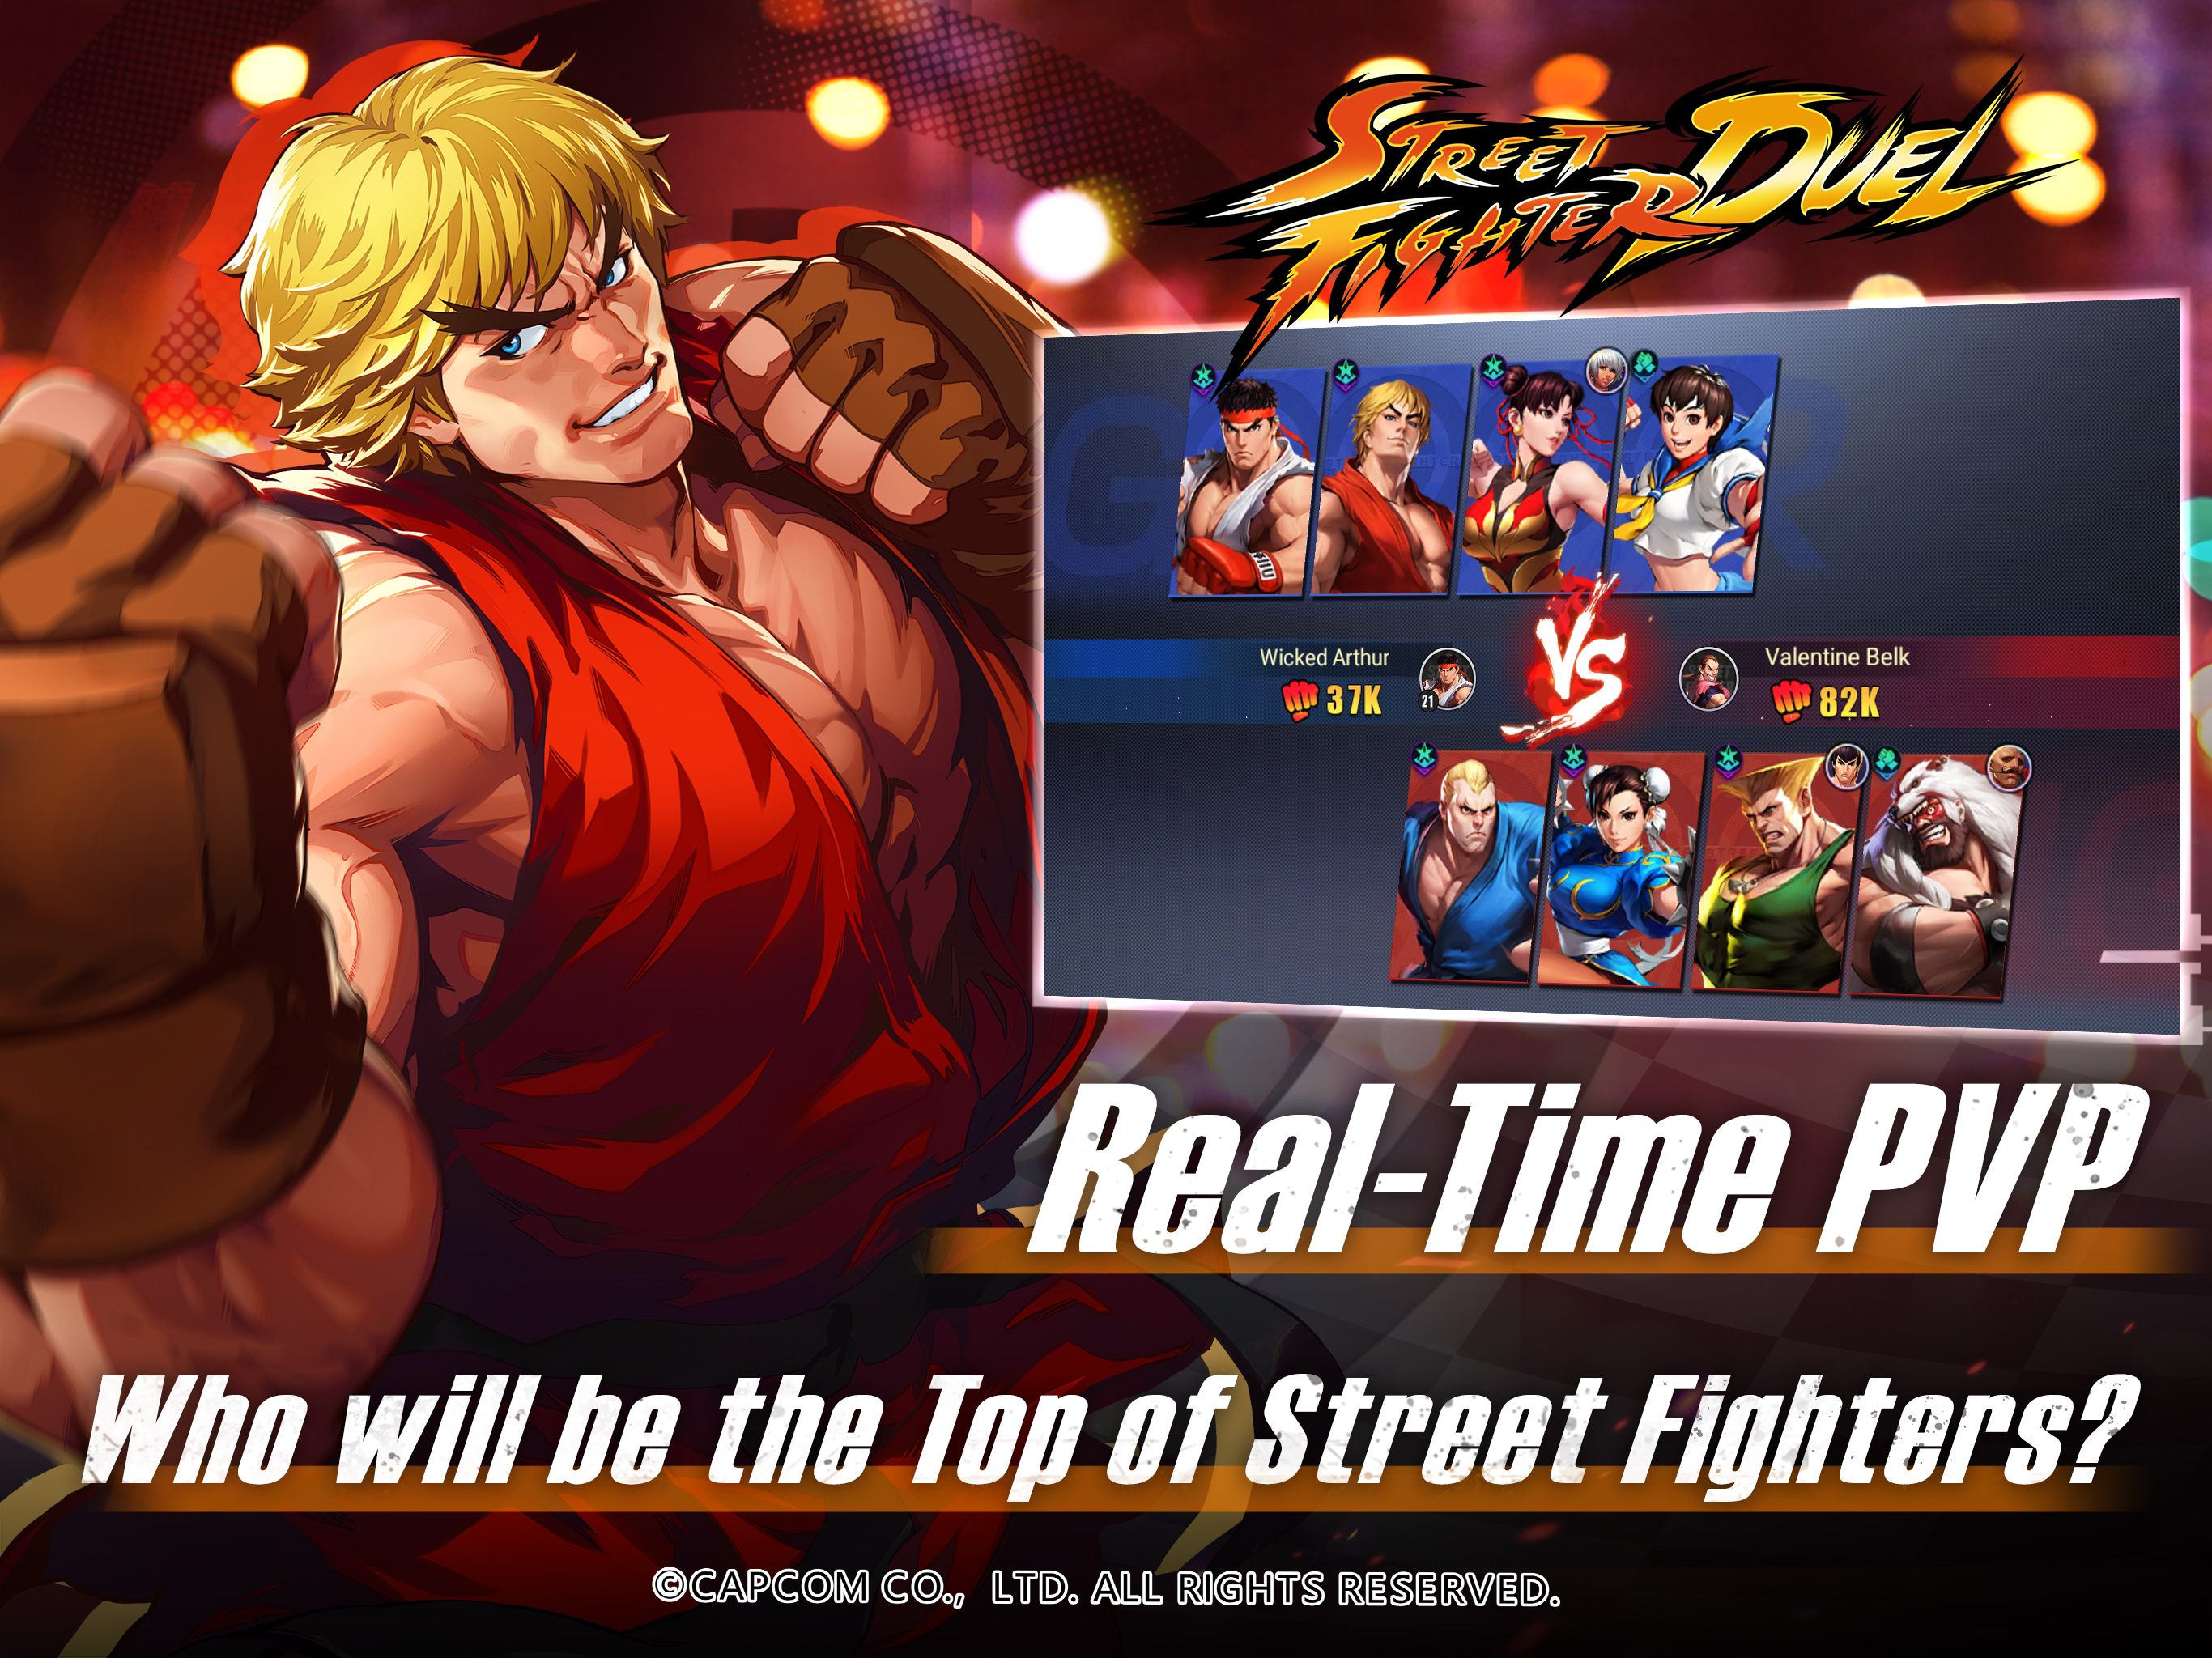 Download & Play Street Fighter: Duel on PC & Mac (Emulator)